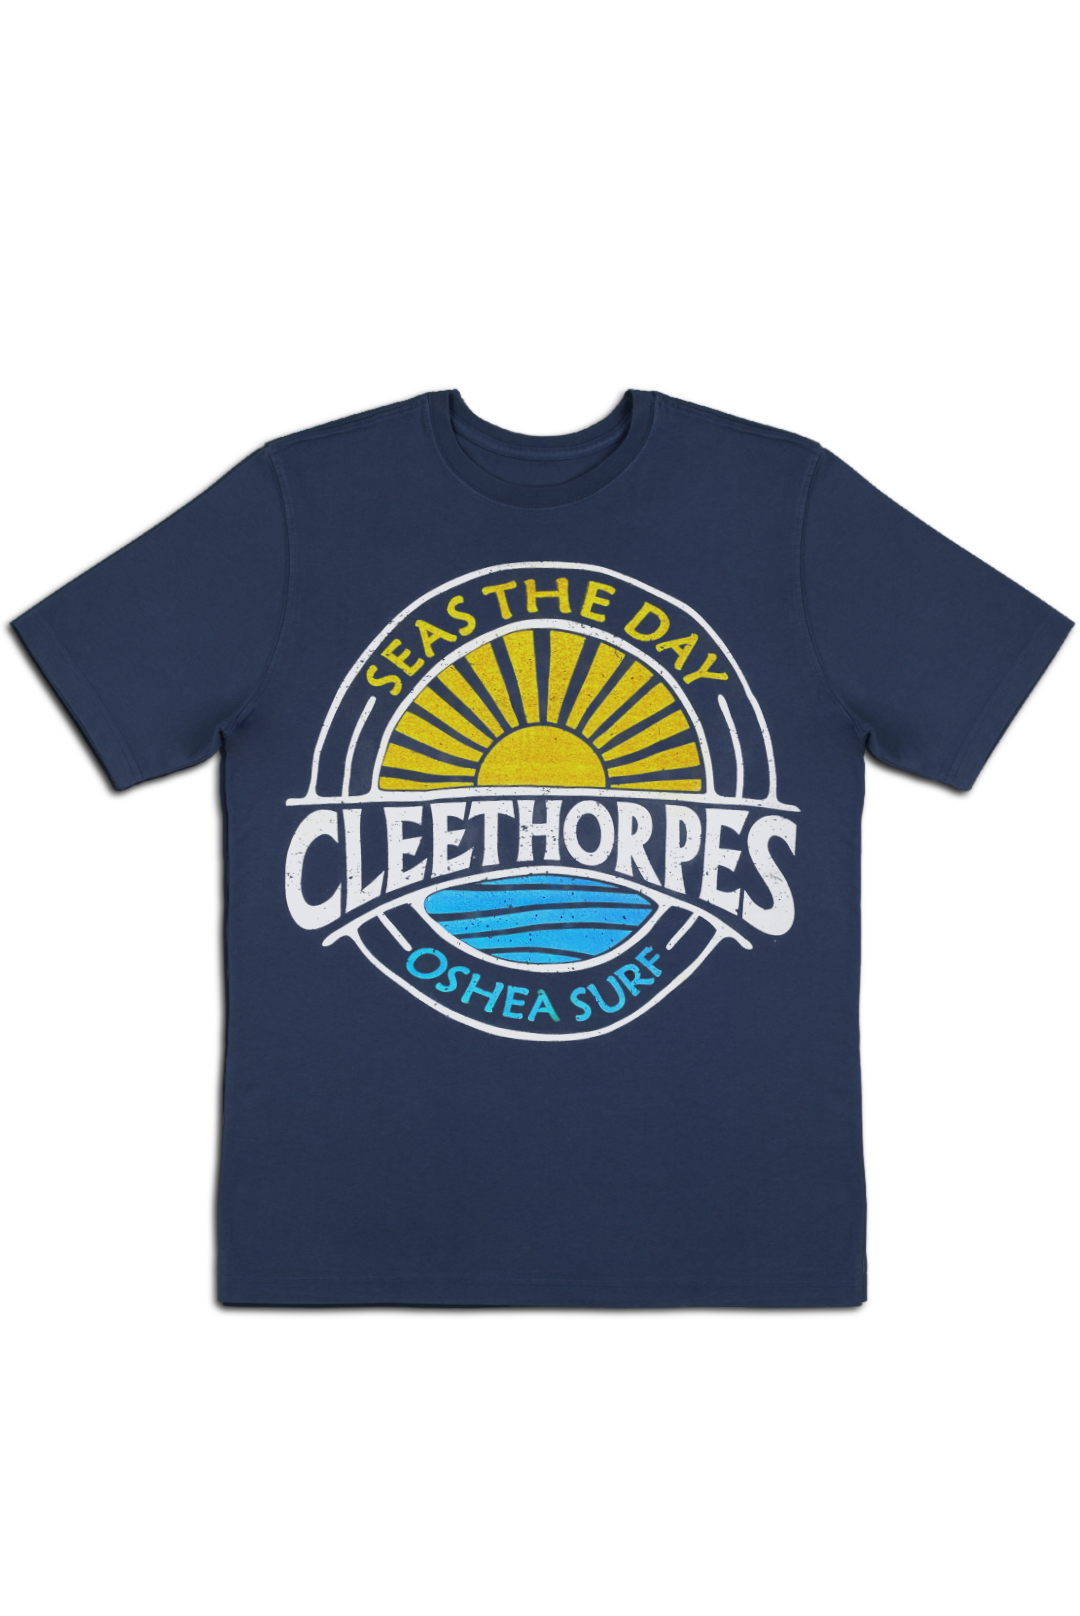 CLEETHORPES SEAS THE DAY -NAVY T-SHIRT